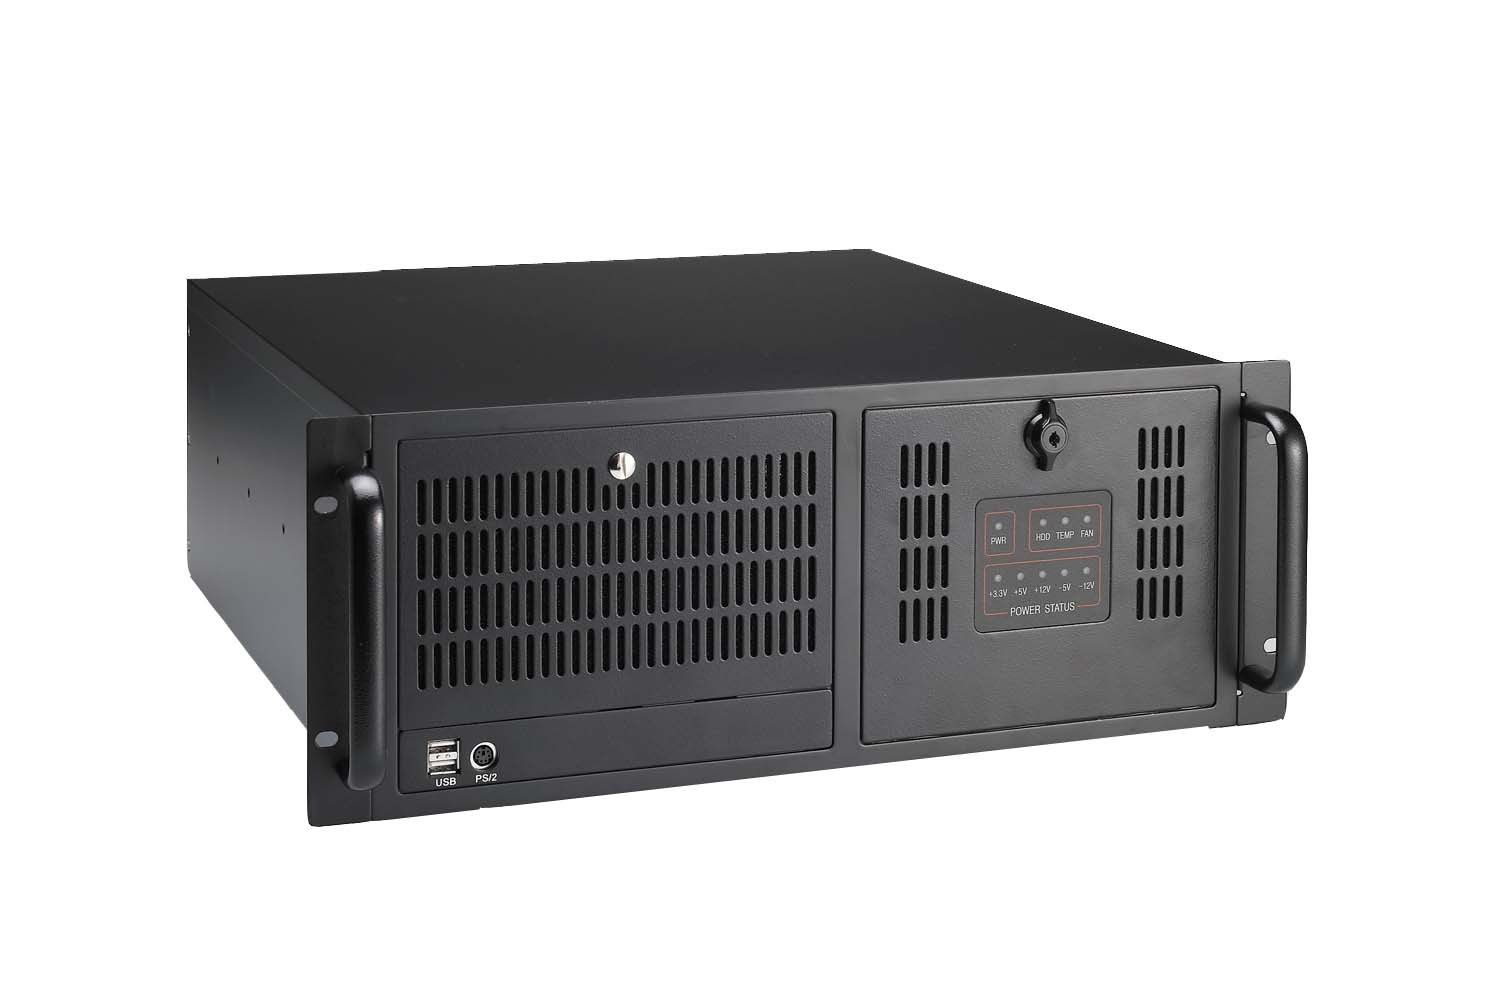 Industrial grade 4U, Core™ 2 Duo DVR system with optional Video Capture card